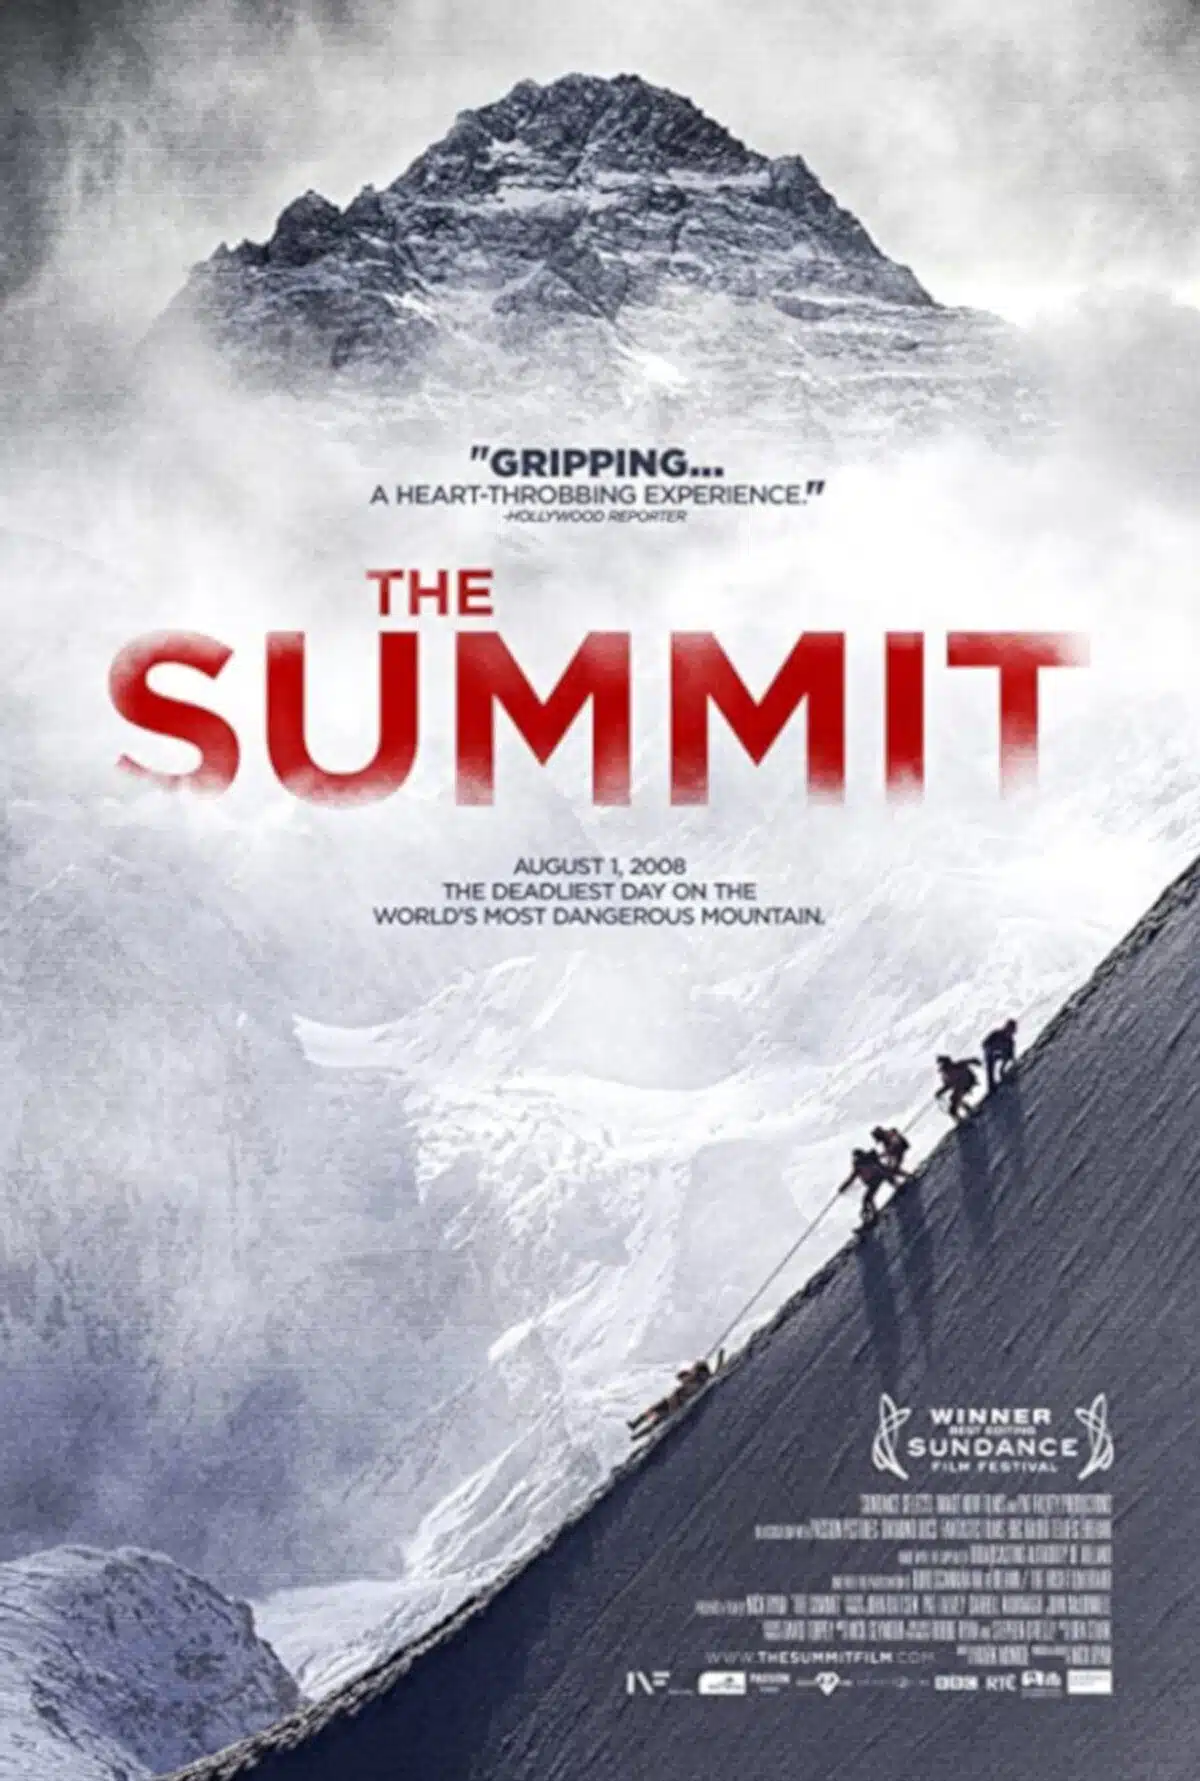 Not all mountain climbing movies have happy endings! But don’t let that put you off watching The Summit.